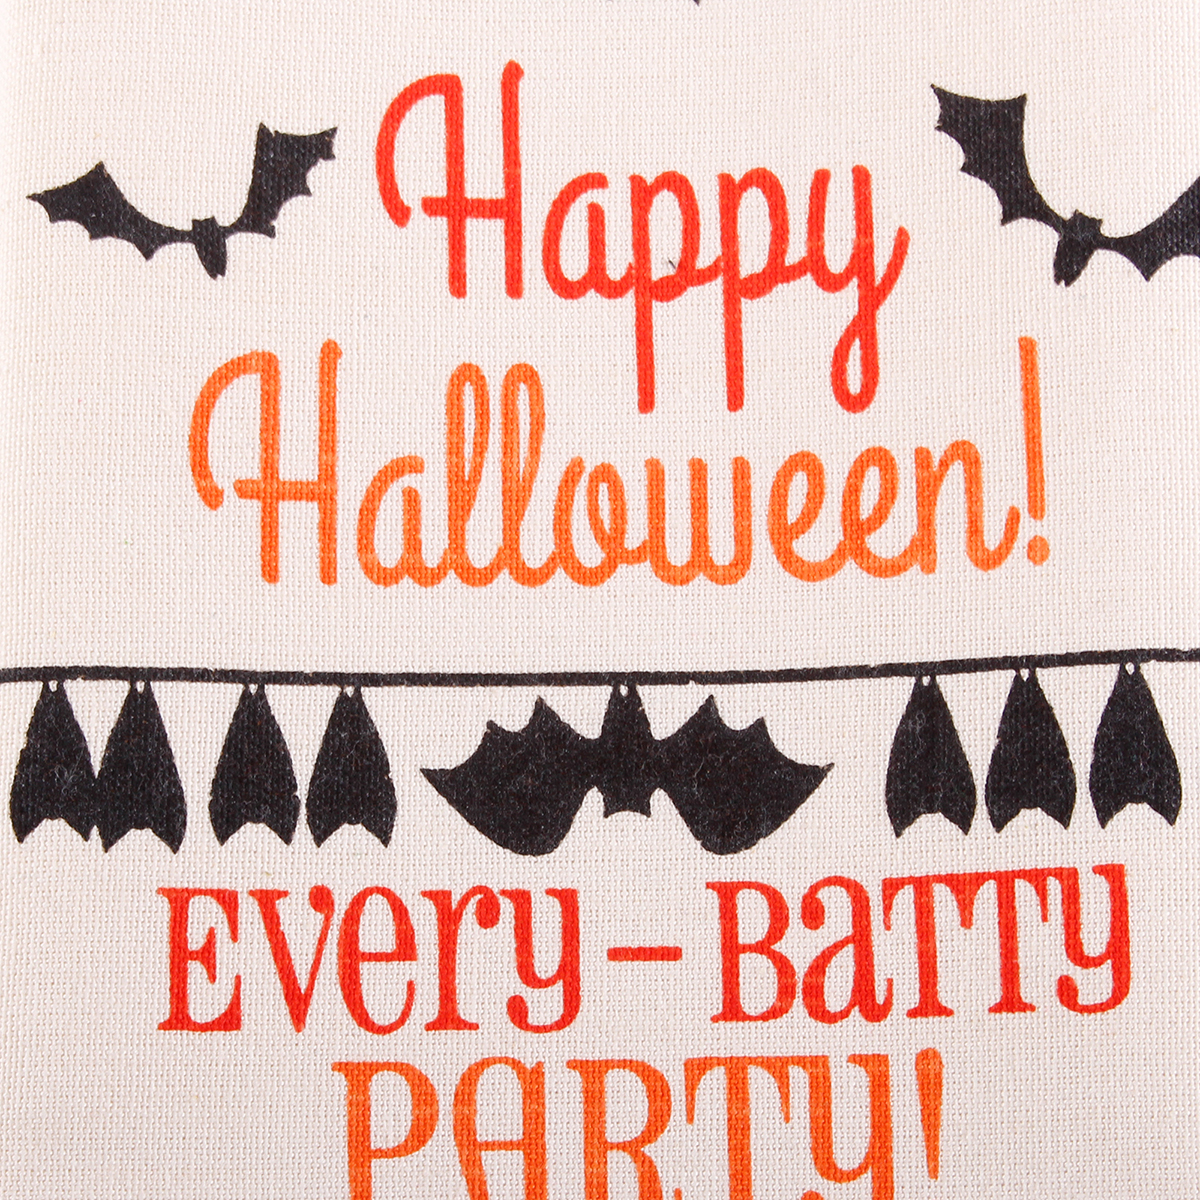 DII(R) Everybatty Party Kitchen Towel Set Of 2